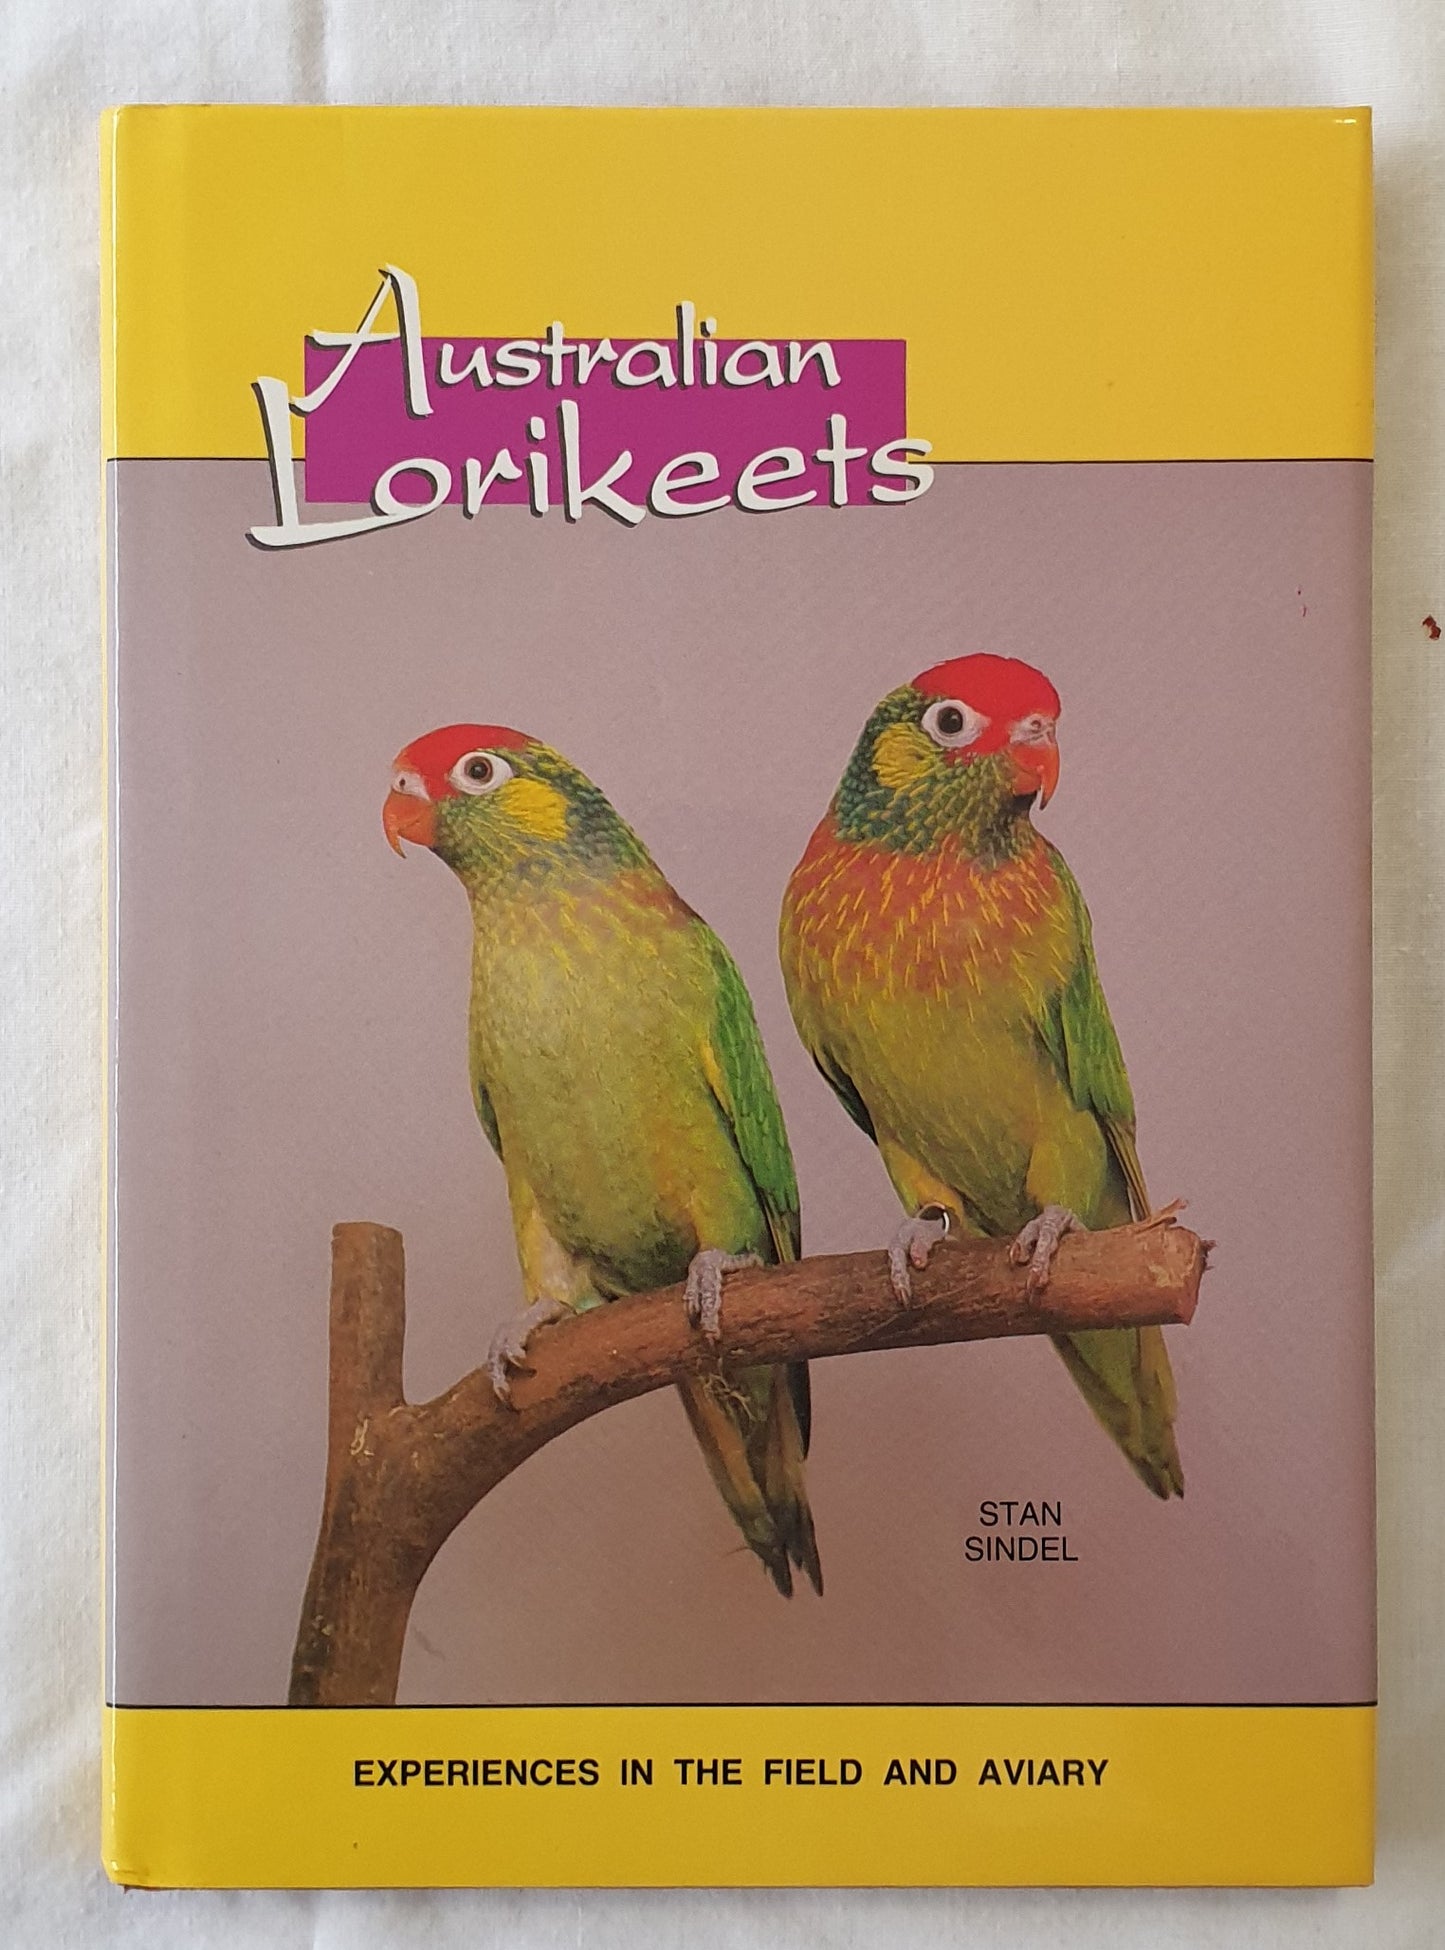 Australian Lorikeets  Experiences in the field and aviary  by Stan Sindel